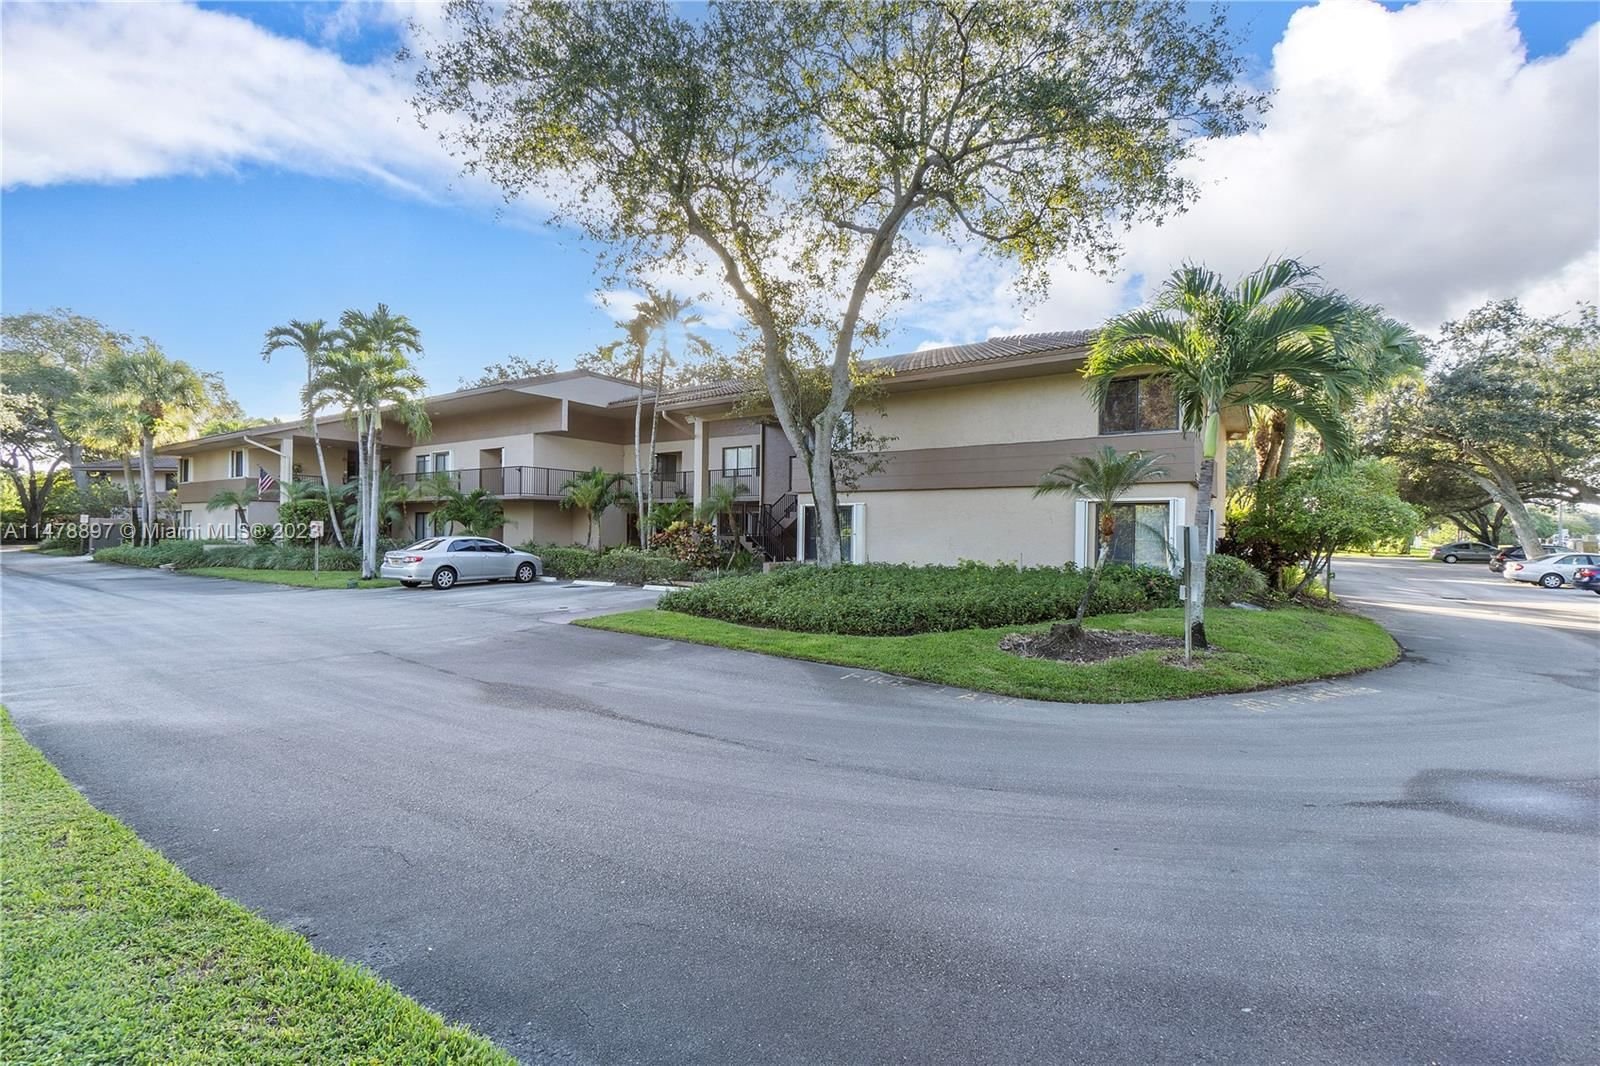 Real estate property located at 9531 2nd Pl #2-F, Broward County, KINGSPORT ESTATES CONDO, Coral Springs, FL